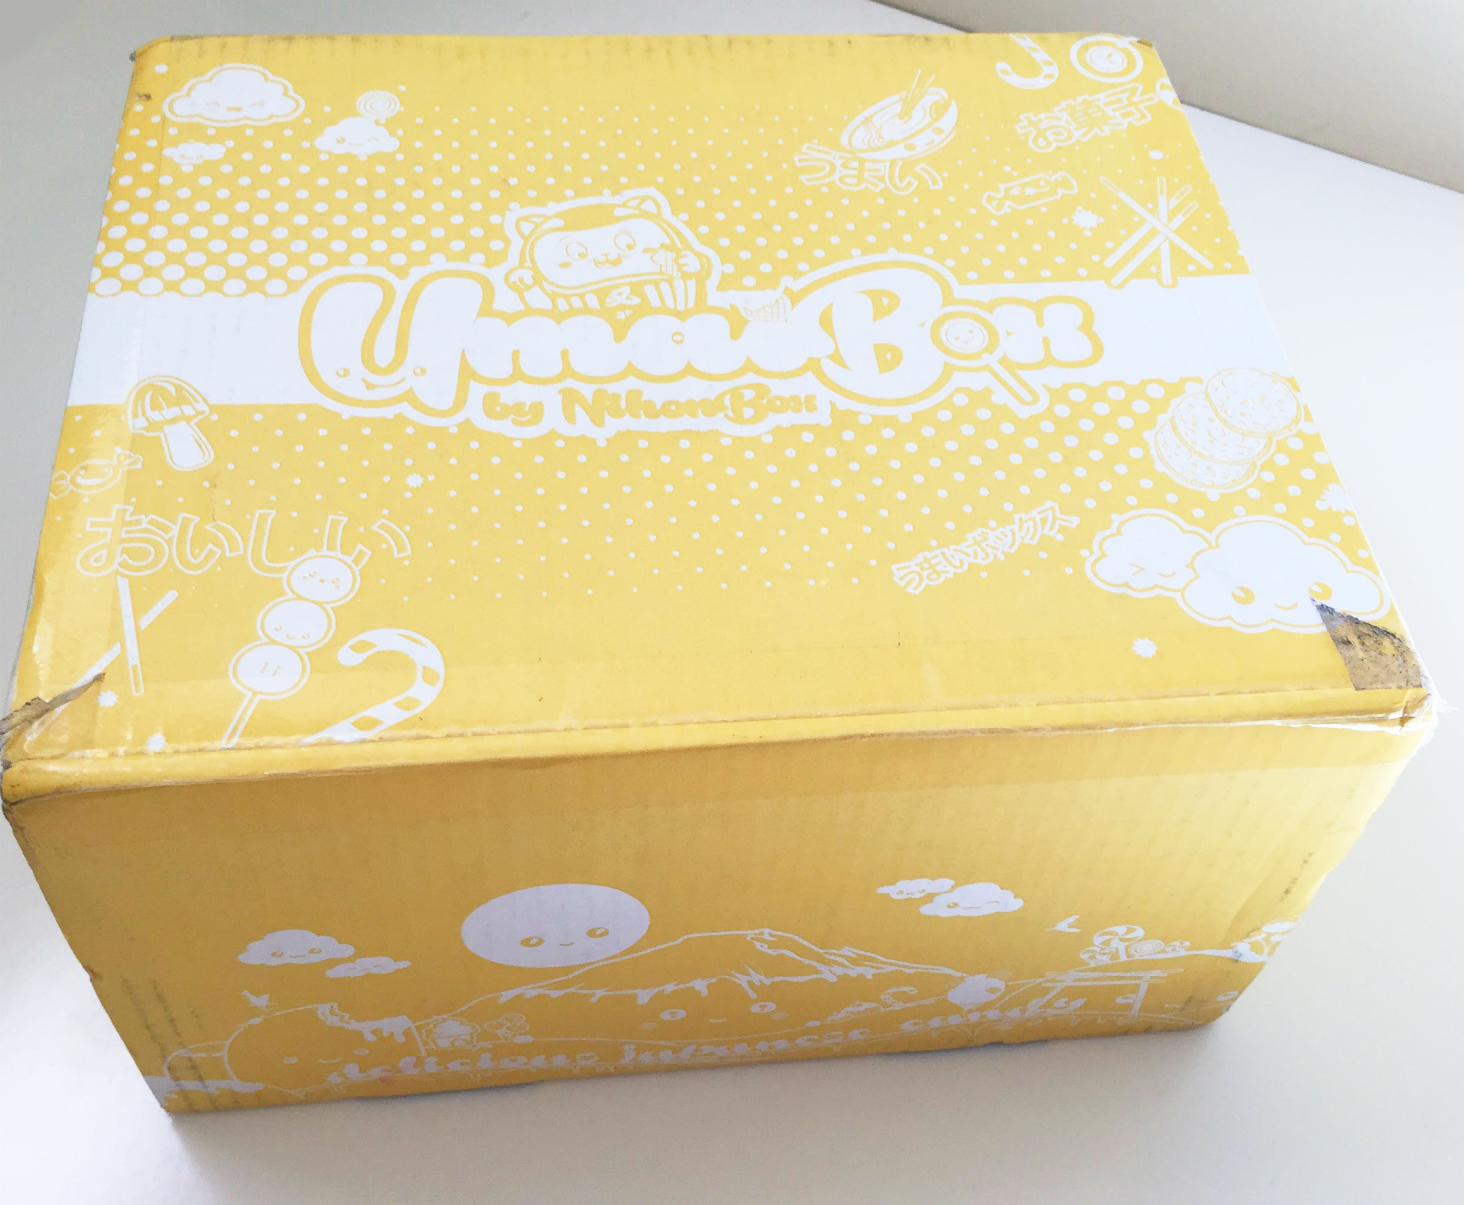 UmaiBox Food Subscription Review + Coupon – March 2018